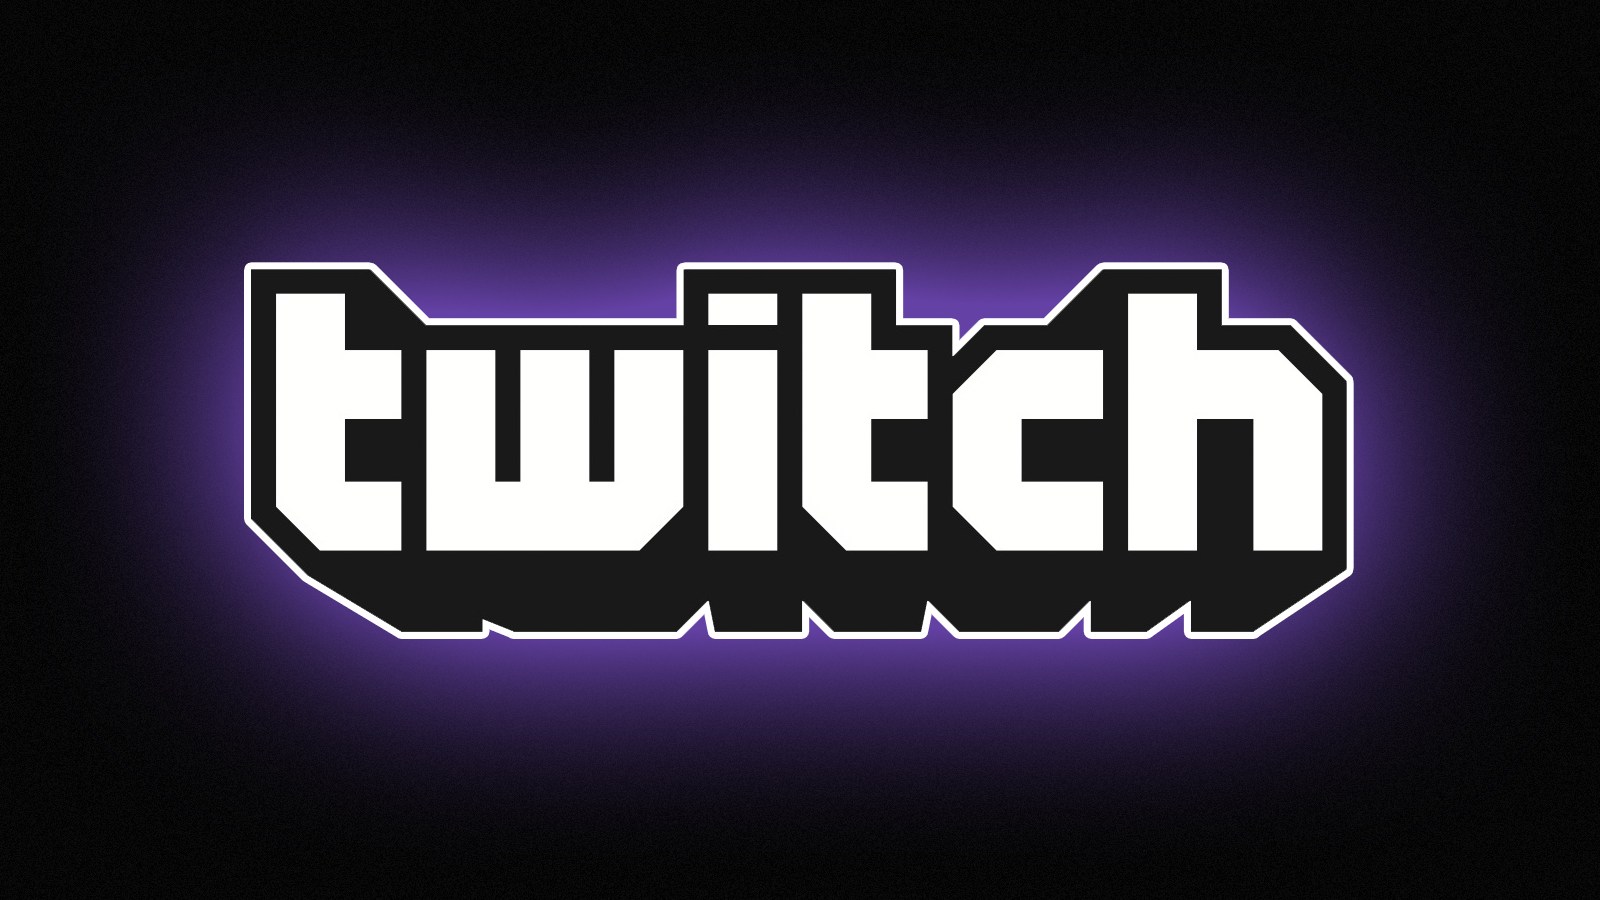 Game Live Broadcasting Service Twitch Allowing Four Types Of Cryptocurrency To Be Discounted ゲーム実況配信サービスtwitch 暗号通貨4種の投げ銭が可能に Steemit